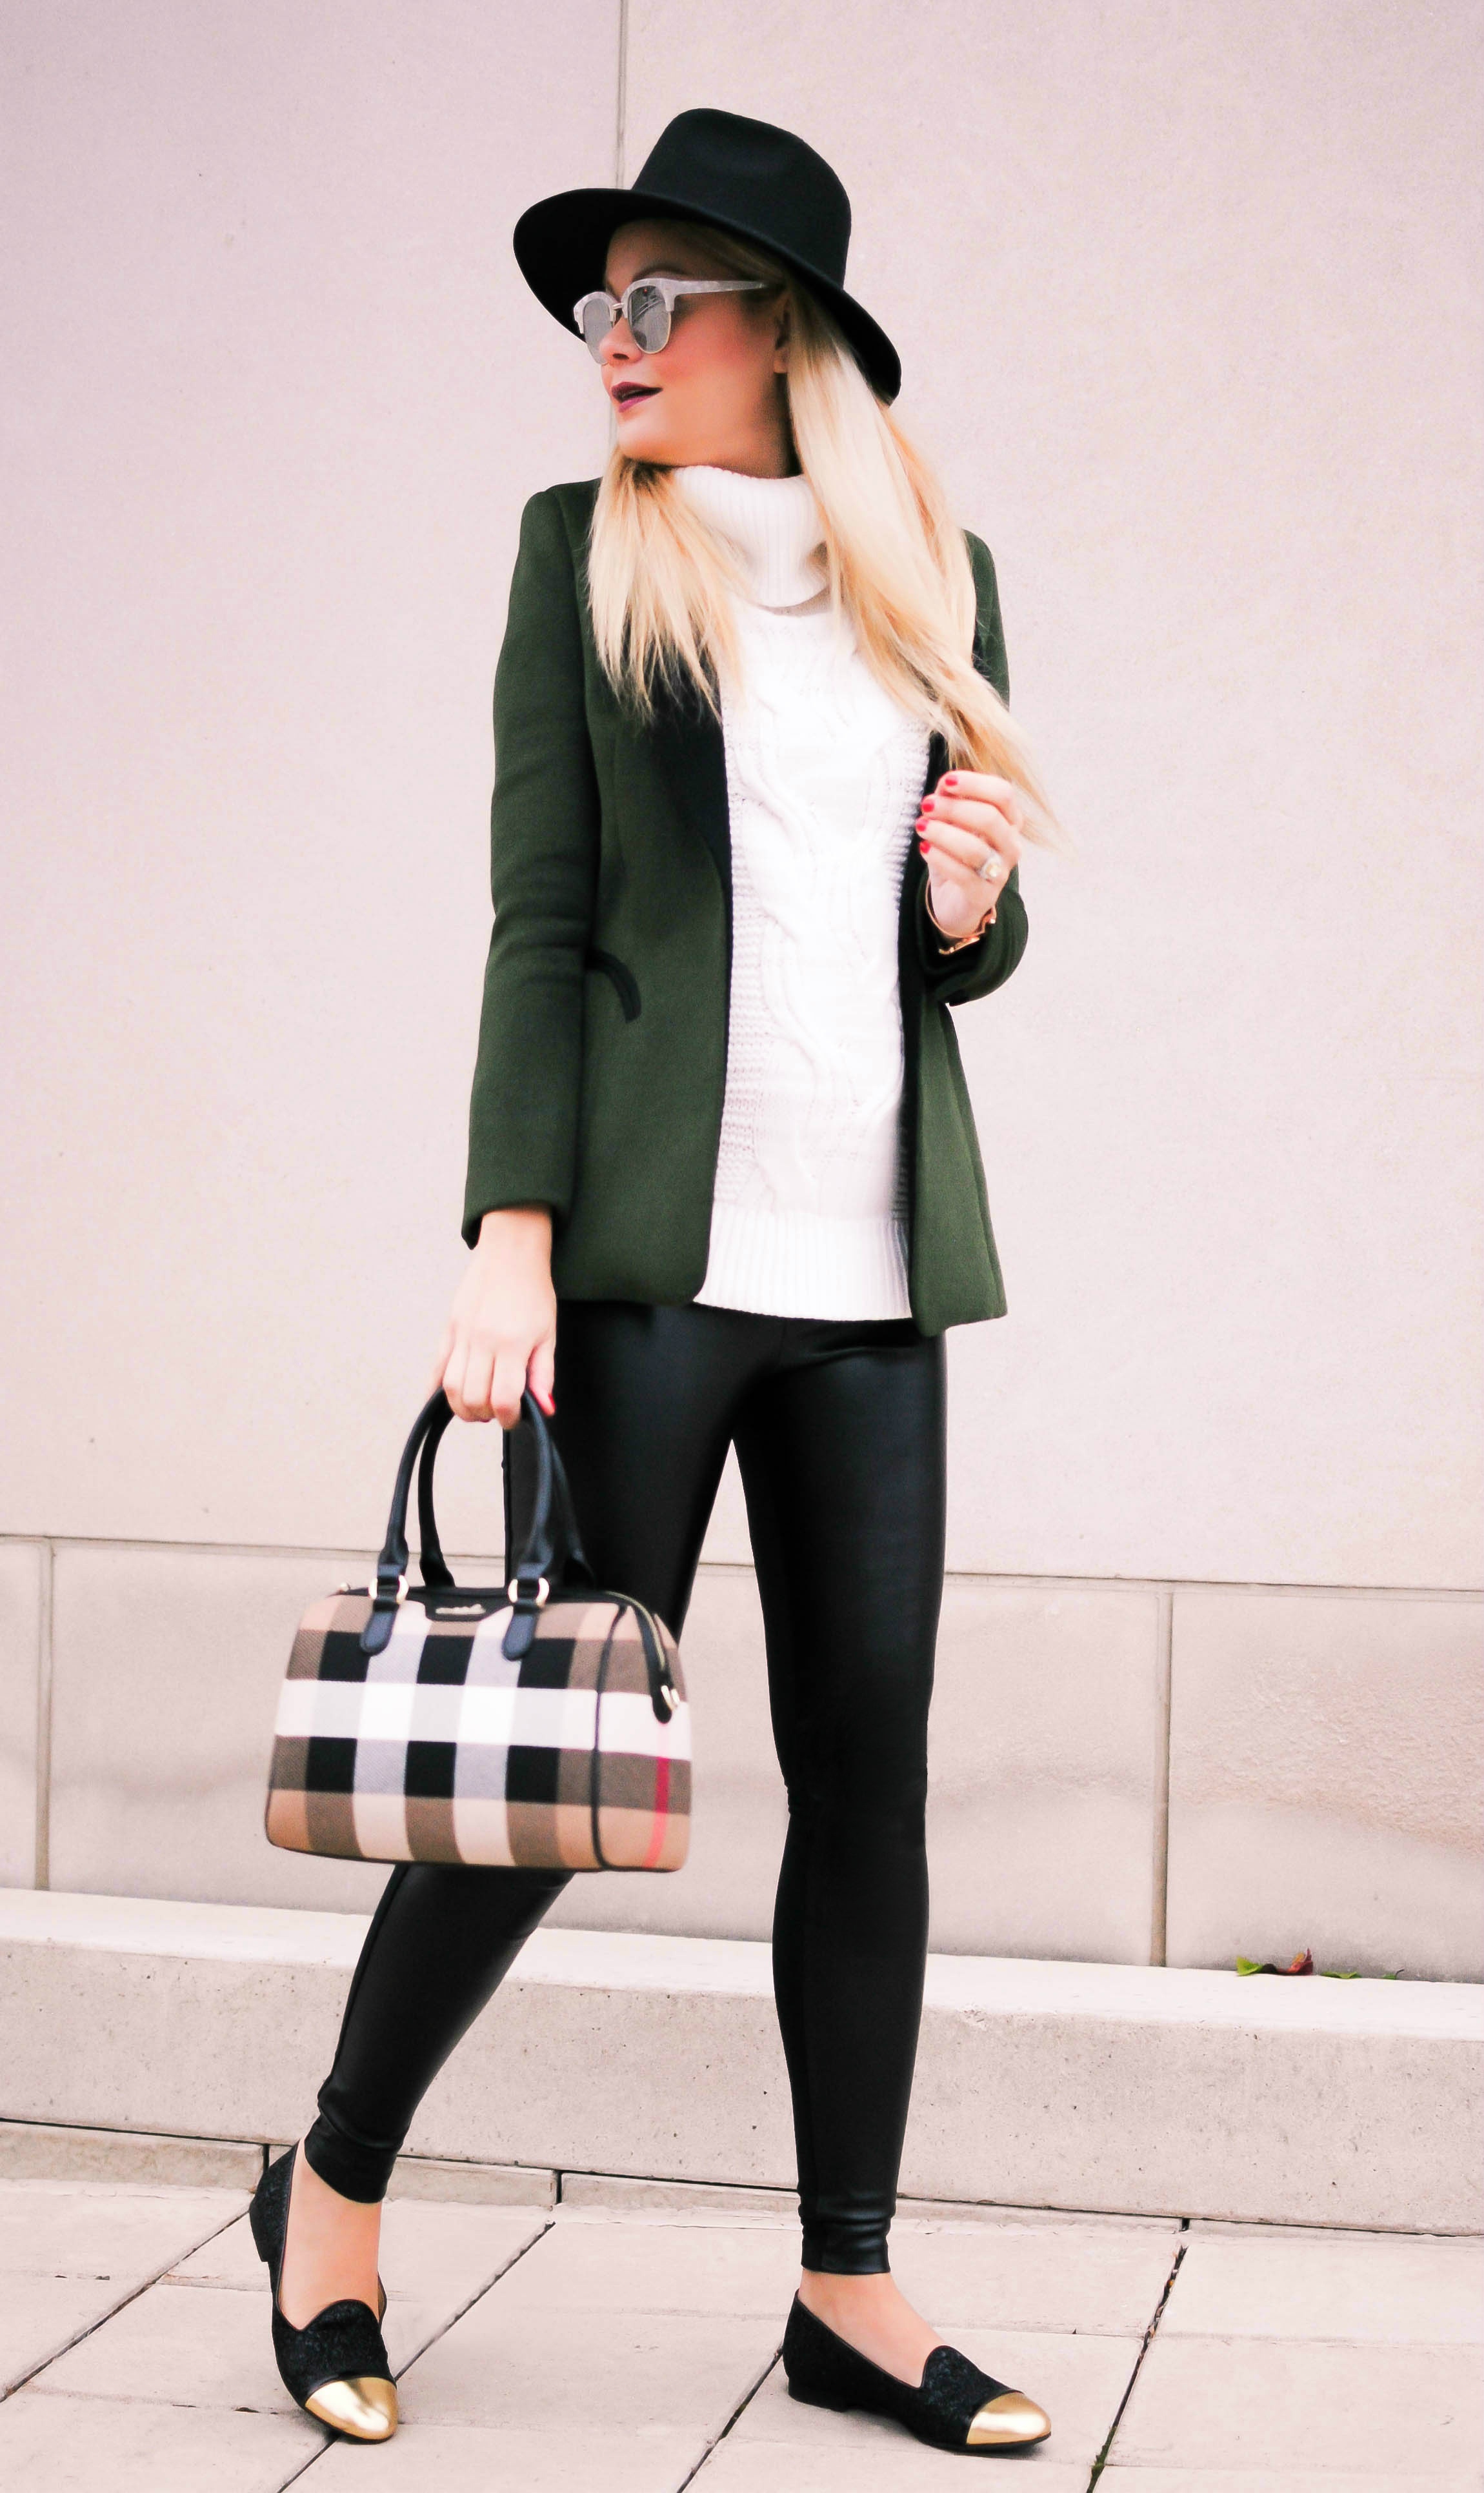 vanessa-lambert-blogger-behind-what-would-v-wear-wears-a-green-wool-blazer-from-vipme-while-6-months-pregnant_23